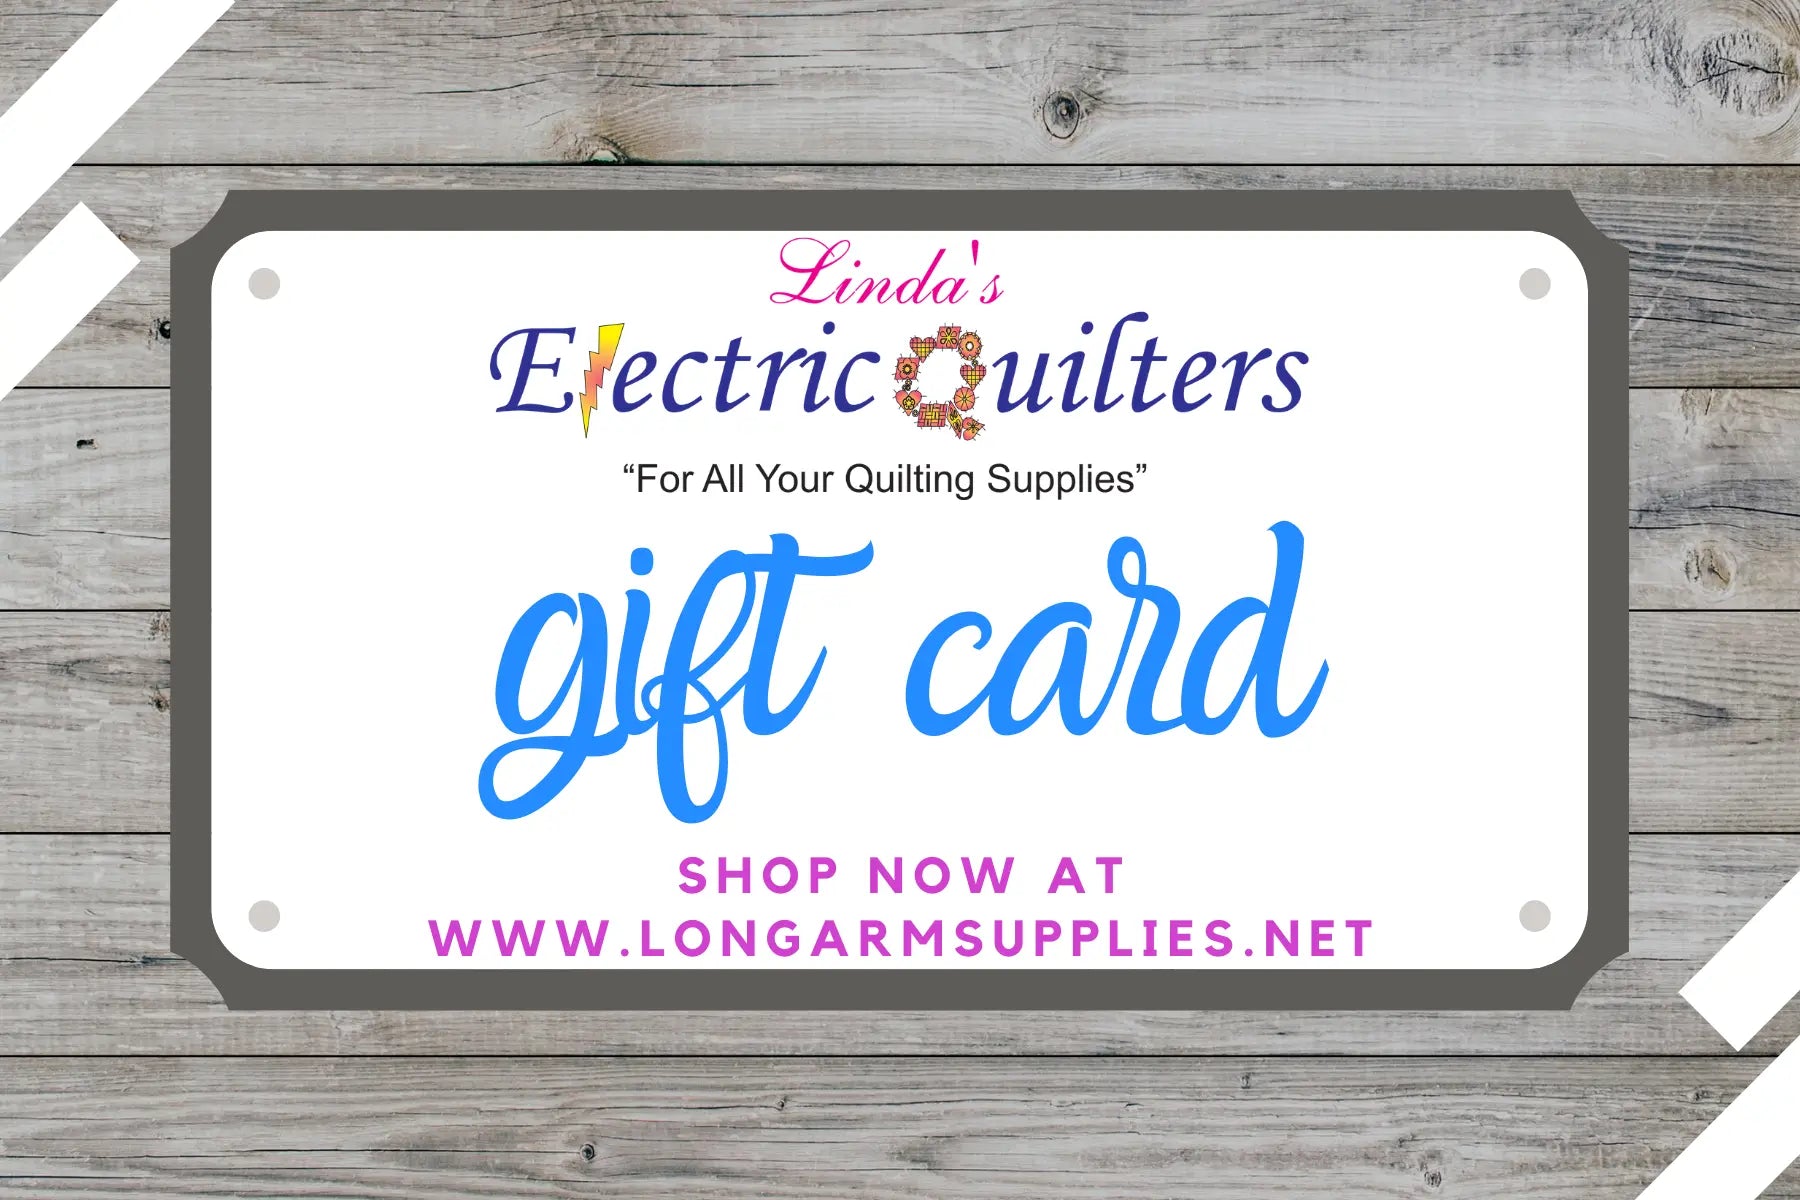 Linda's Electric Quilters Gift Card Linda's Electric Quilters